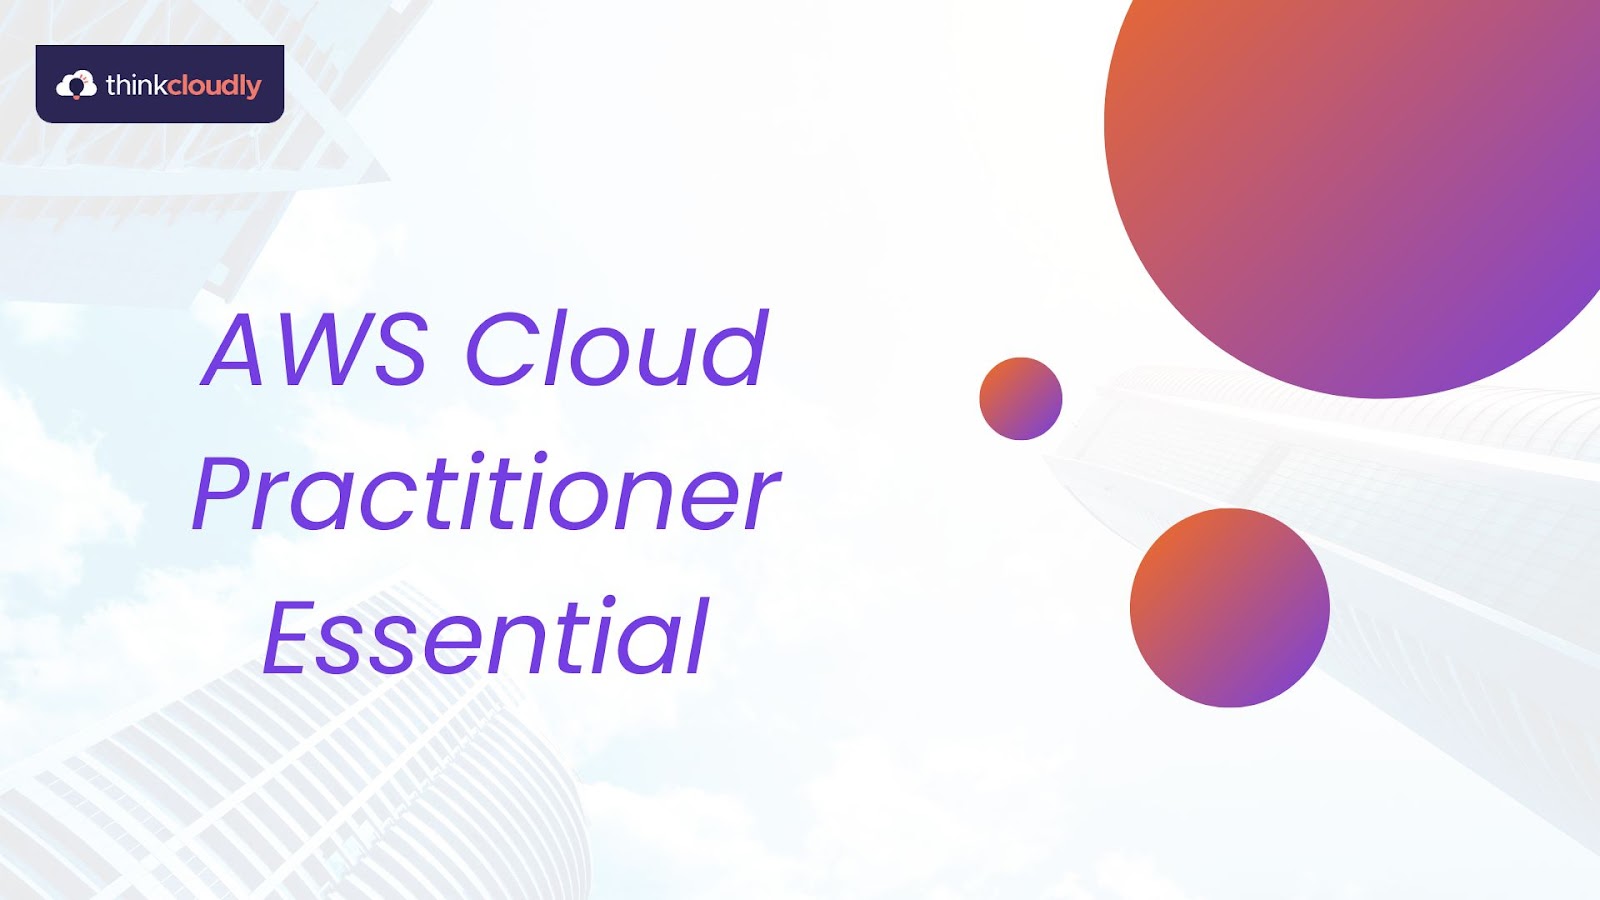 AWS Cloud Practitioner Essentials: Get Up to Speed with the Cloud